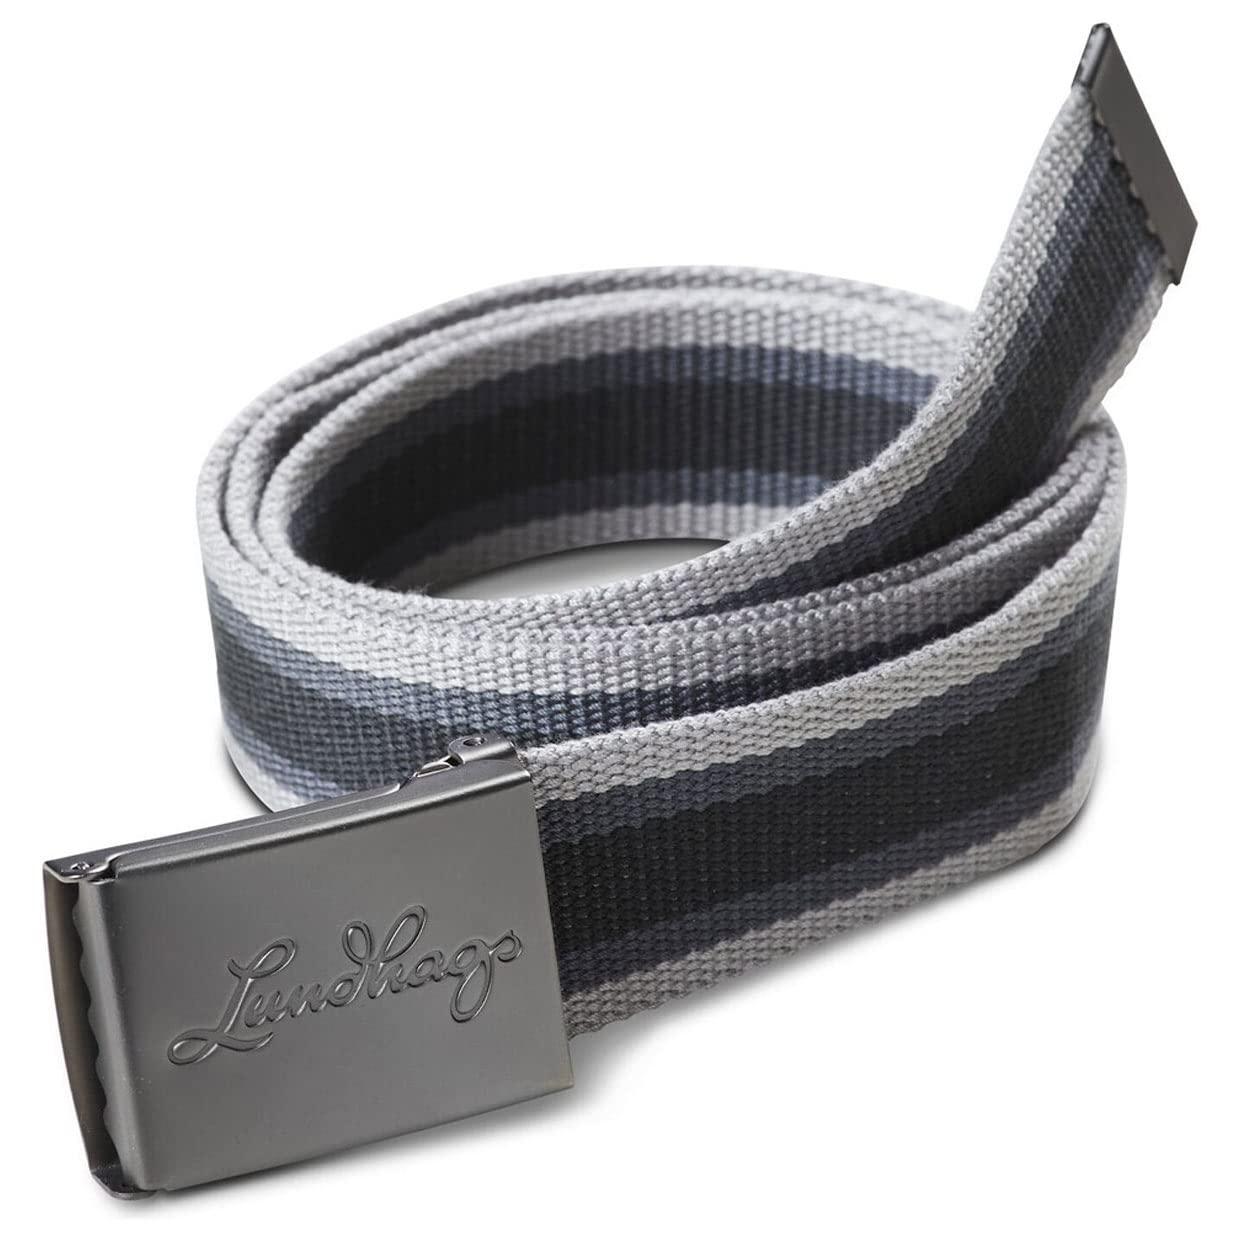 Lundhags Buckle Belt - Charcoal